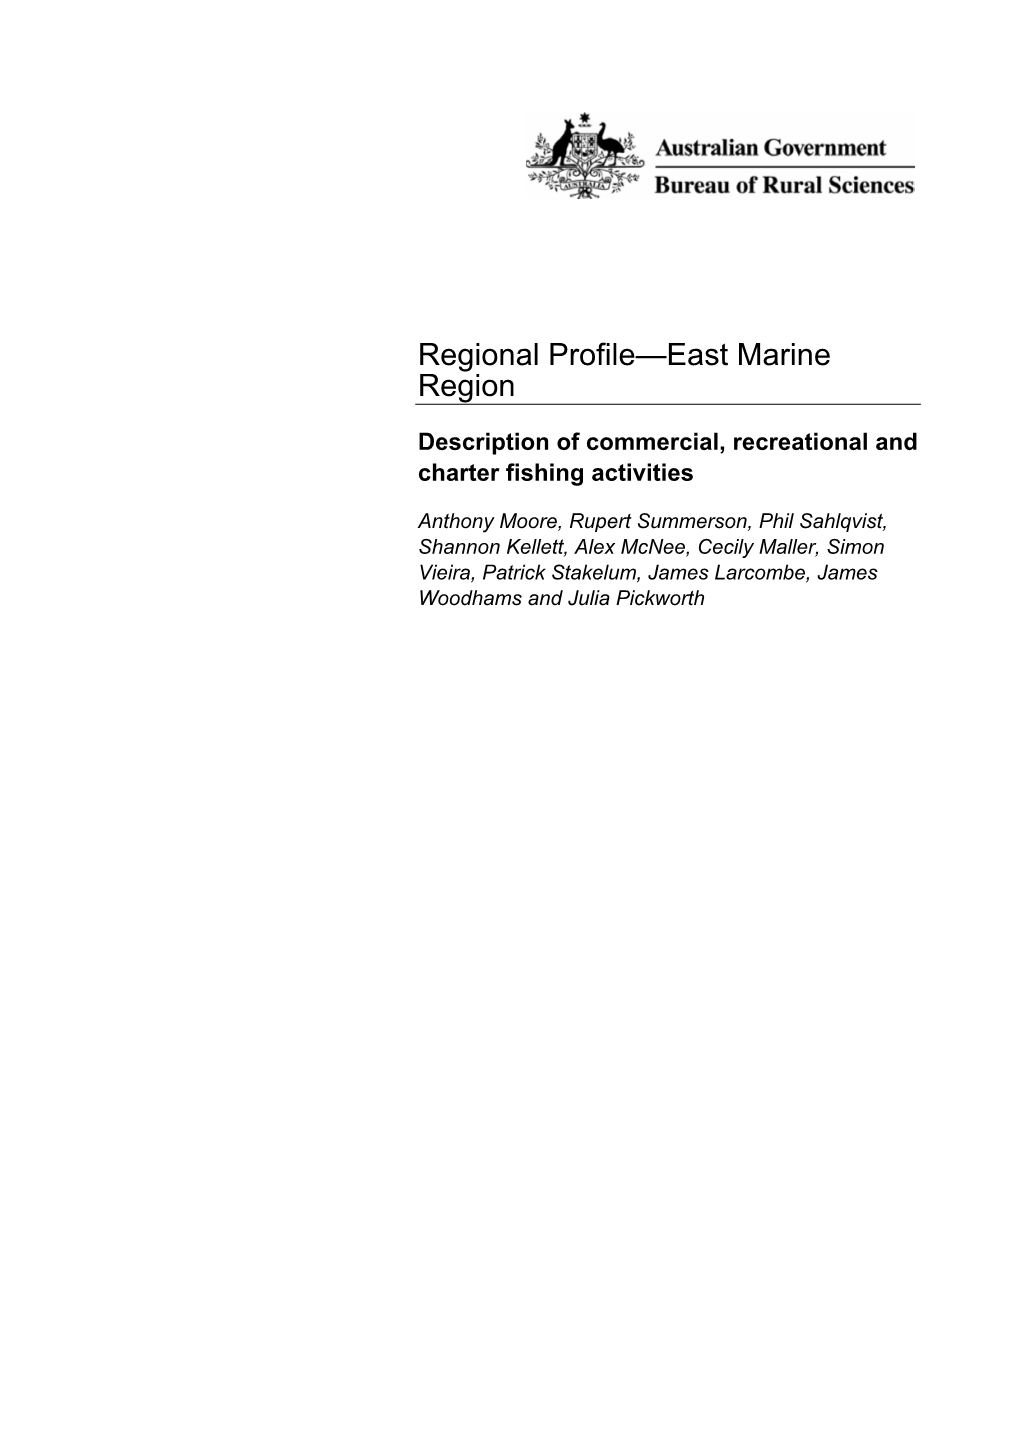 East Marine Region: Description of Commercial, Recreational And